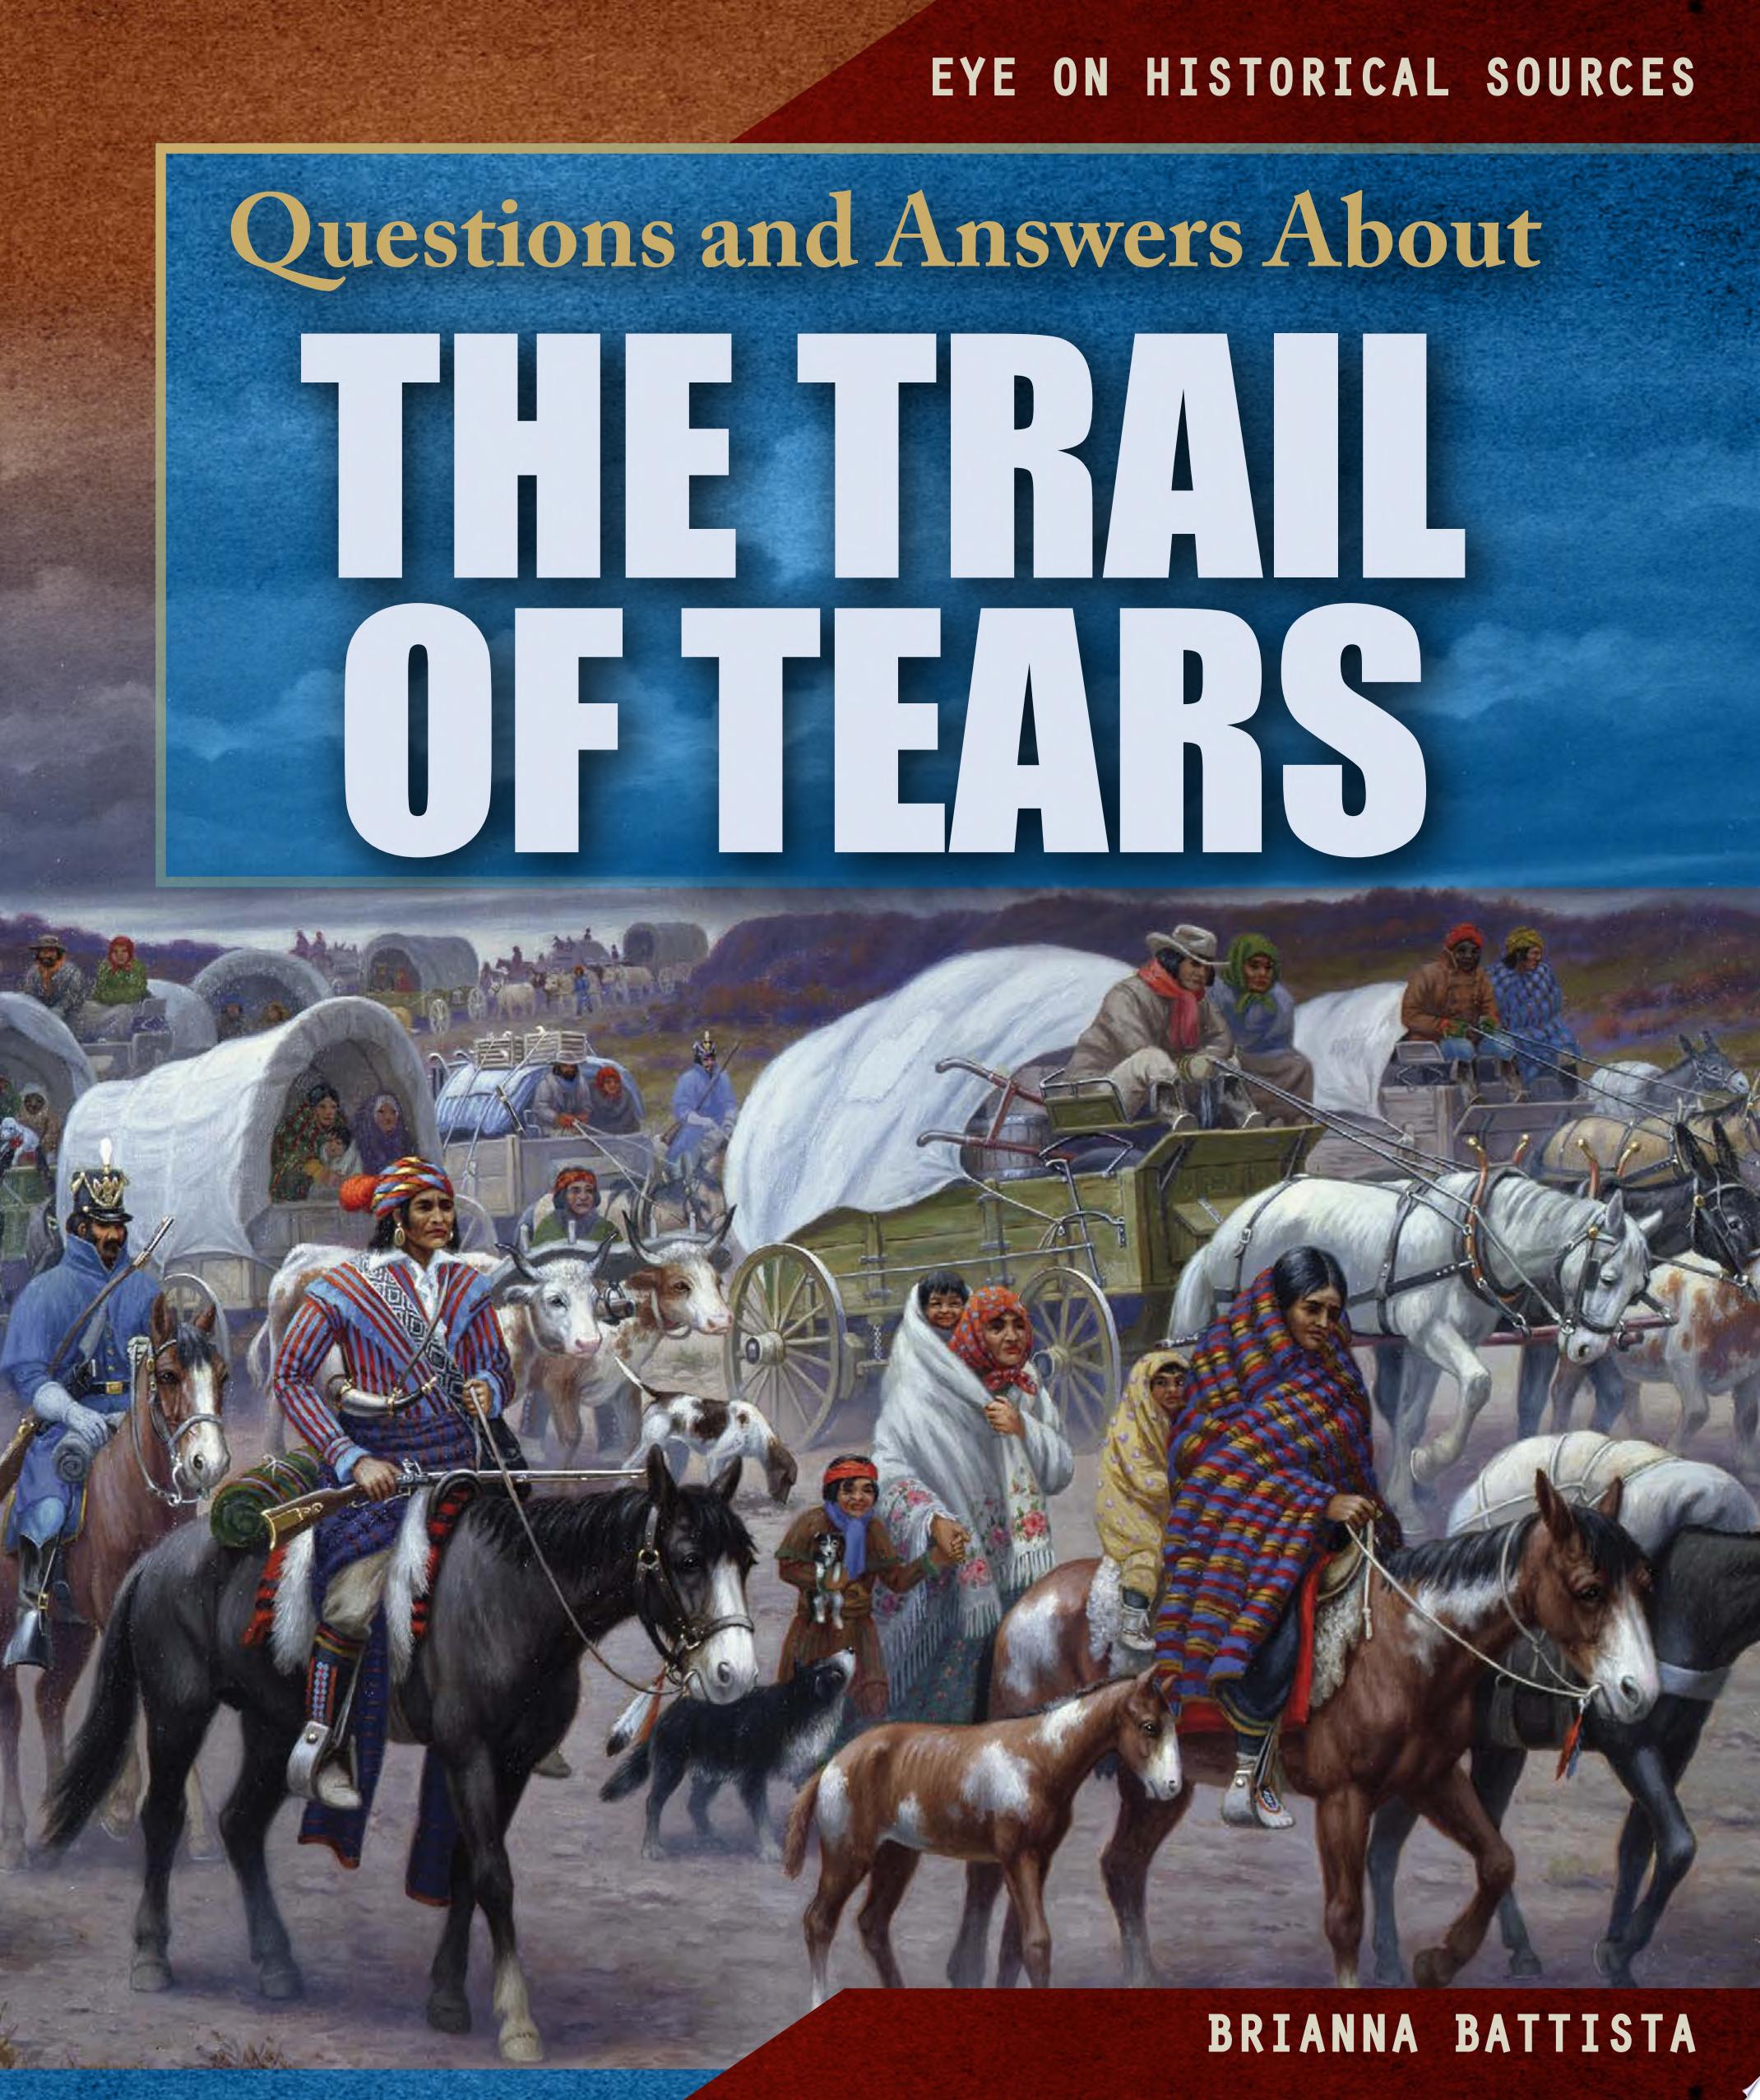 Image for "Questions and Answers About the Trail of Tears"